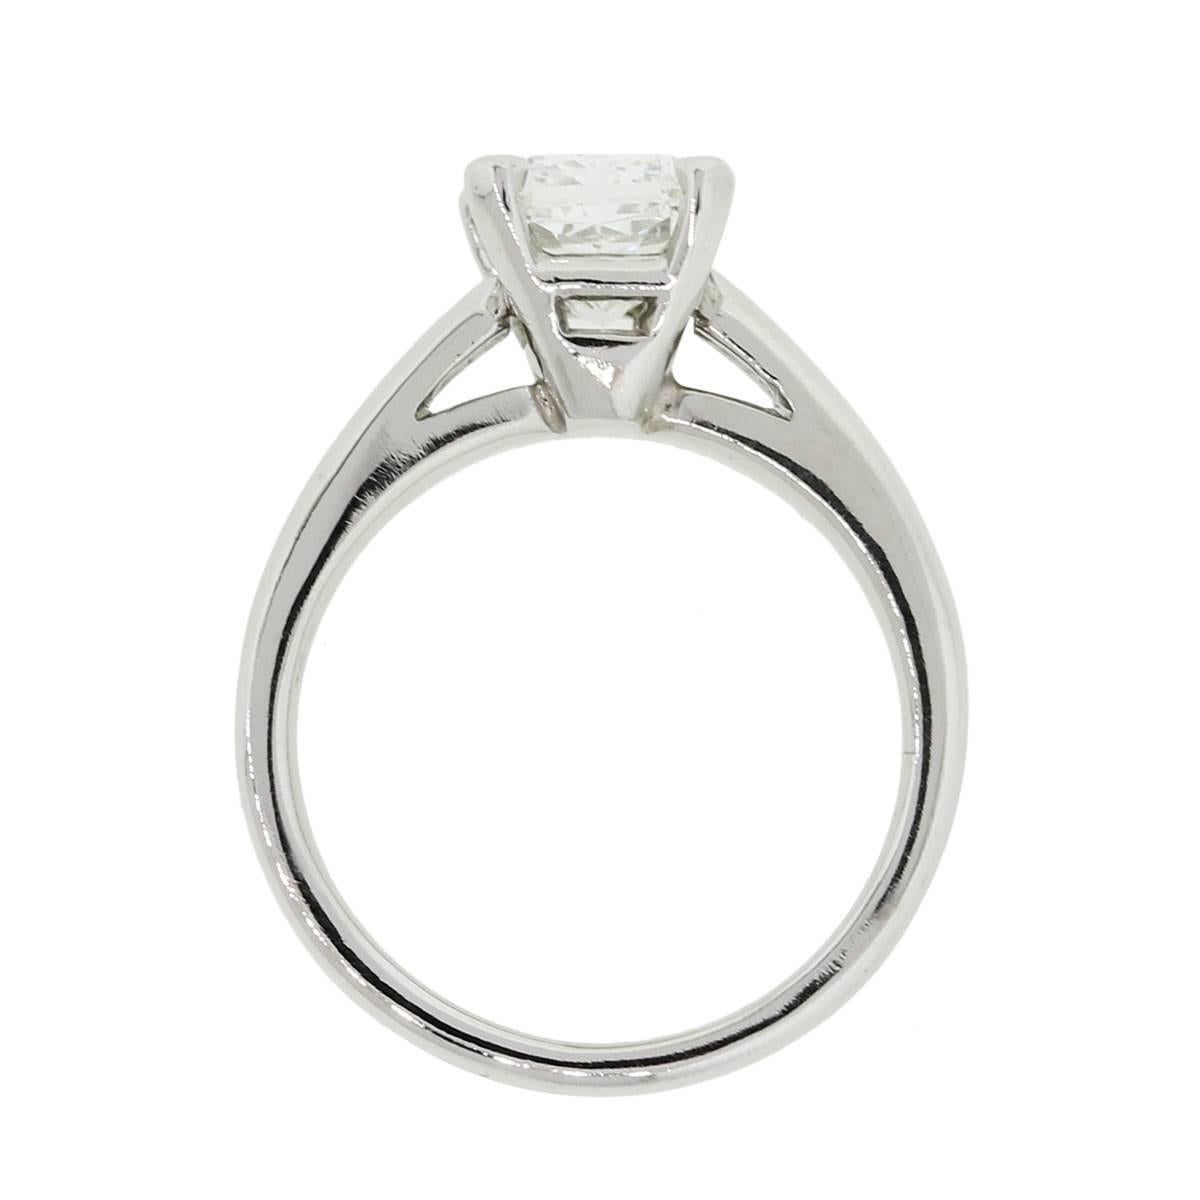 Material: Platinum
Diamond Details: 2.05ct GIA certified radiant cut diamond. G in color SI1 in clarity
Ring Size: 5.5 (can be sized)
Ring Measurements: 0.98″ x 0.33″ x 0.77″
Total Weight: 8.6g (5.5dwt)
Additional Details: This item comes with a